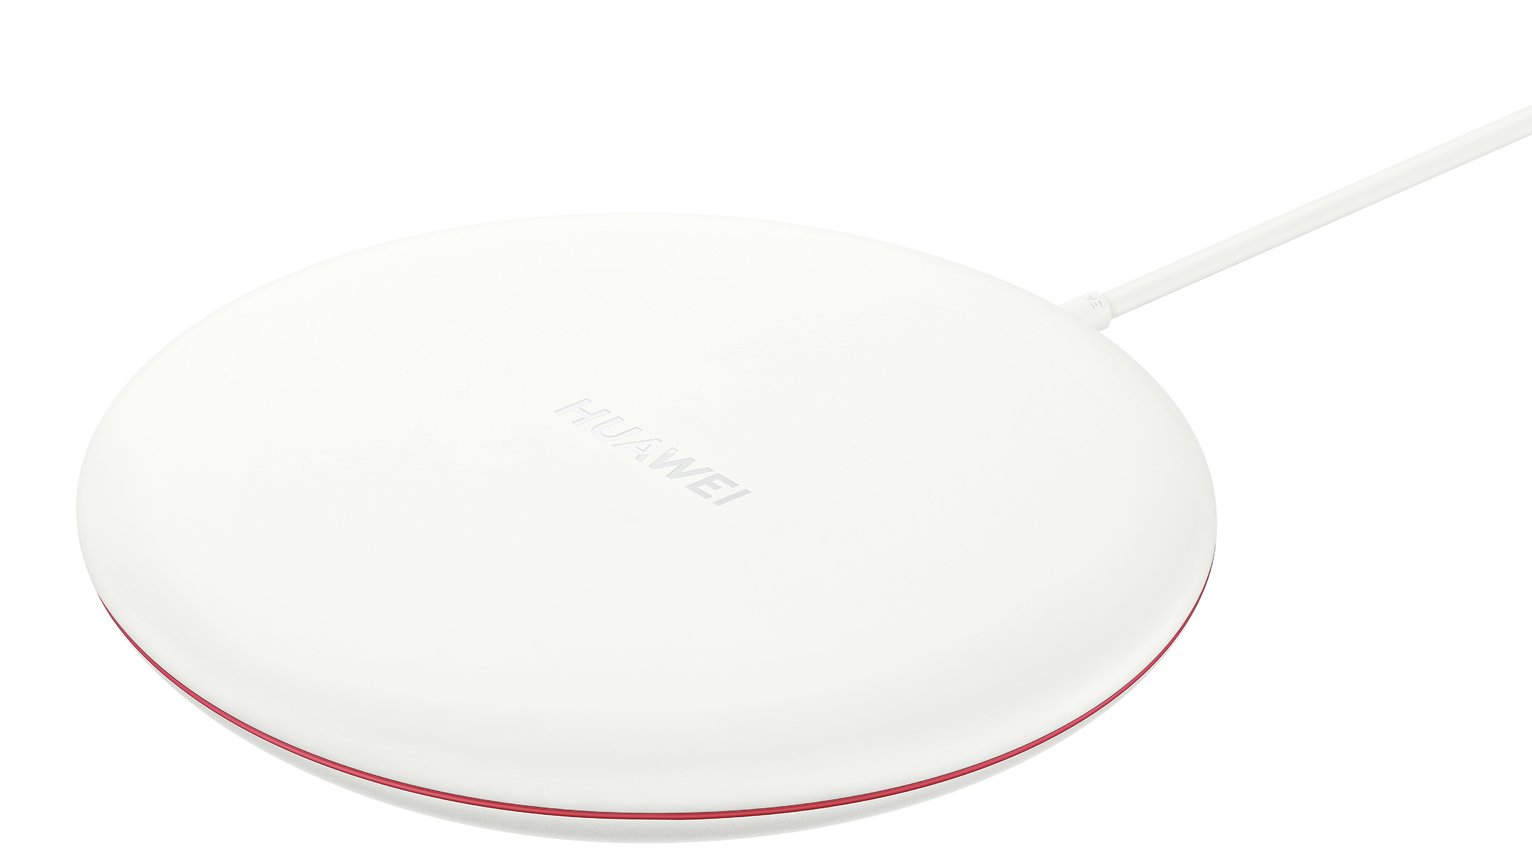 Huawei SuperCharge 15W Wireless Phone Charger